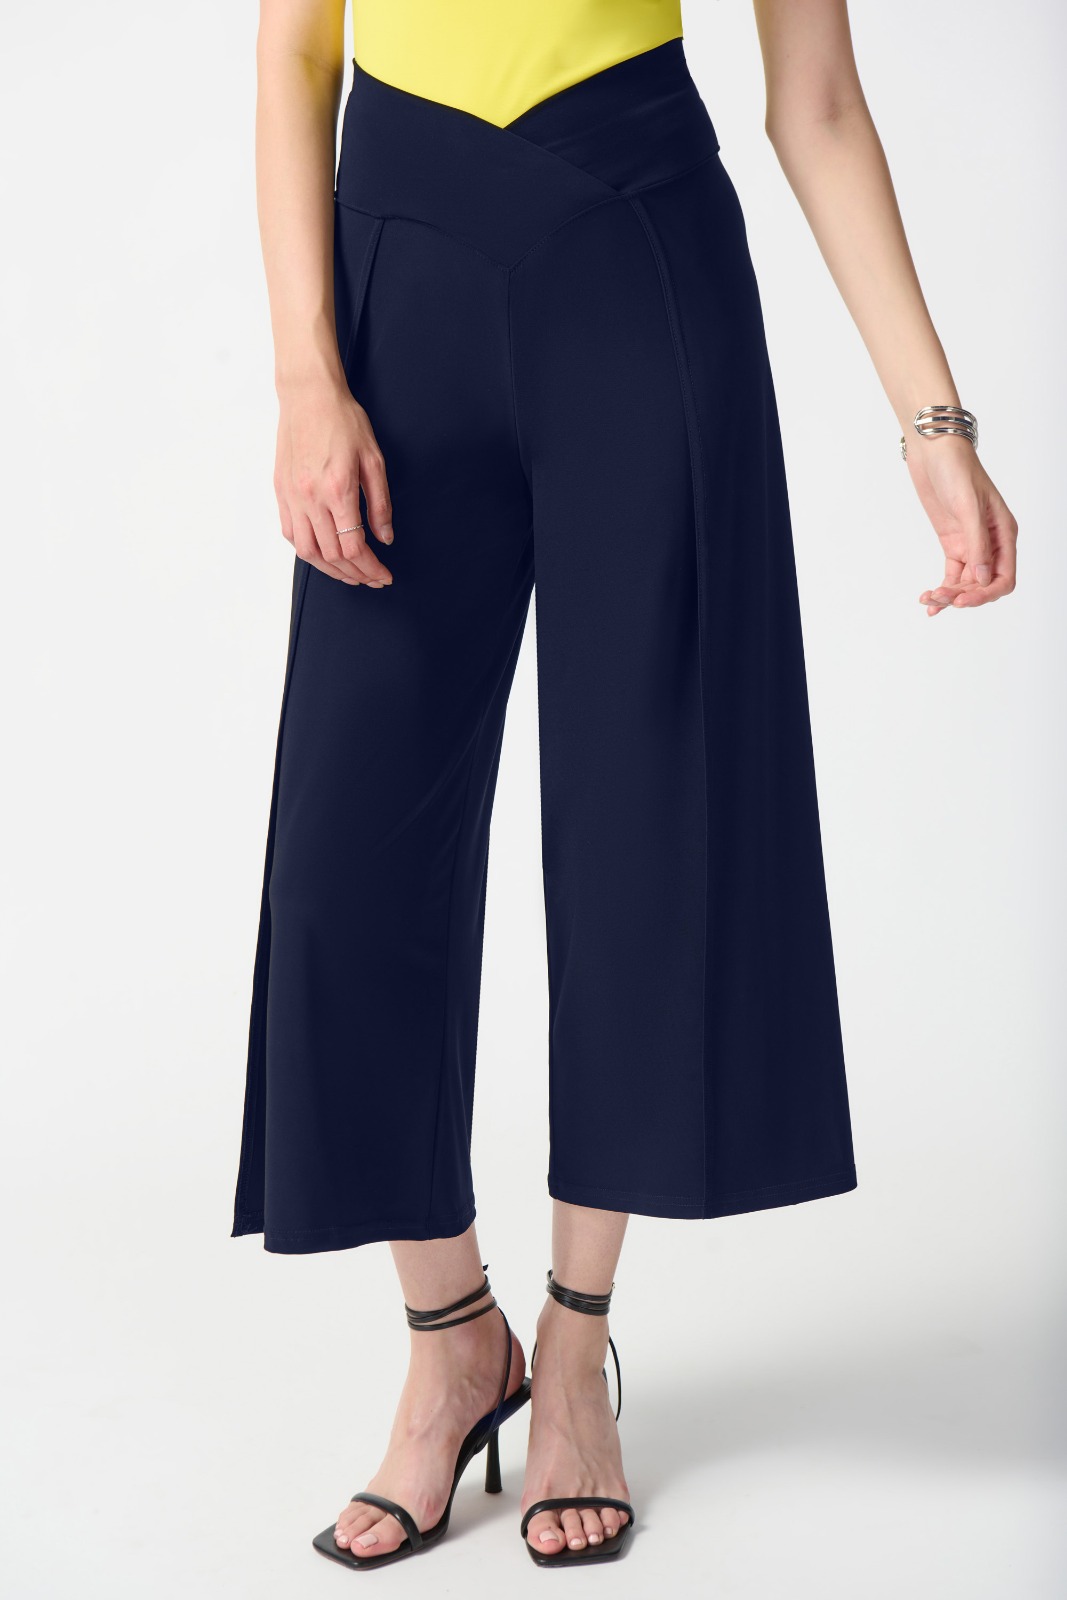 French Dressing Navy Pull-On Bootleg Pant - New Moon Boutique